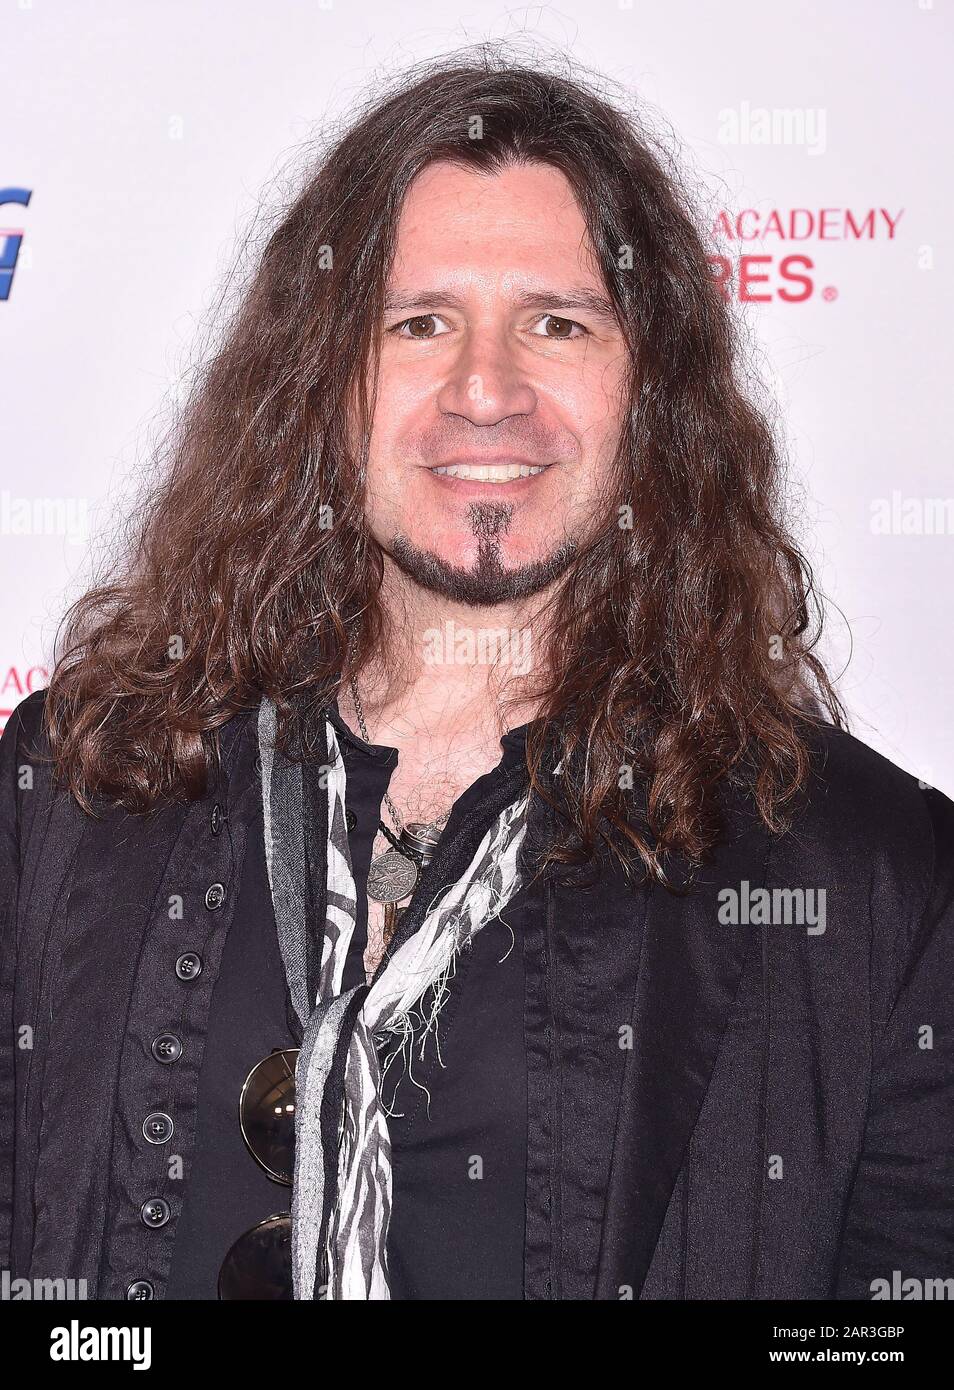 LOS ANGELES, CA - JANUARY 24: Phil X attends the 2020 MusiCares Person Of The Year Honoring Aerosmith at West Hall At Los Angeles Convention Center on January 24, 2020 in Los Angeles, California. Stock Photo